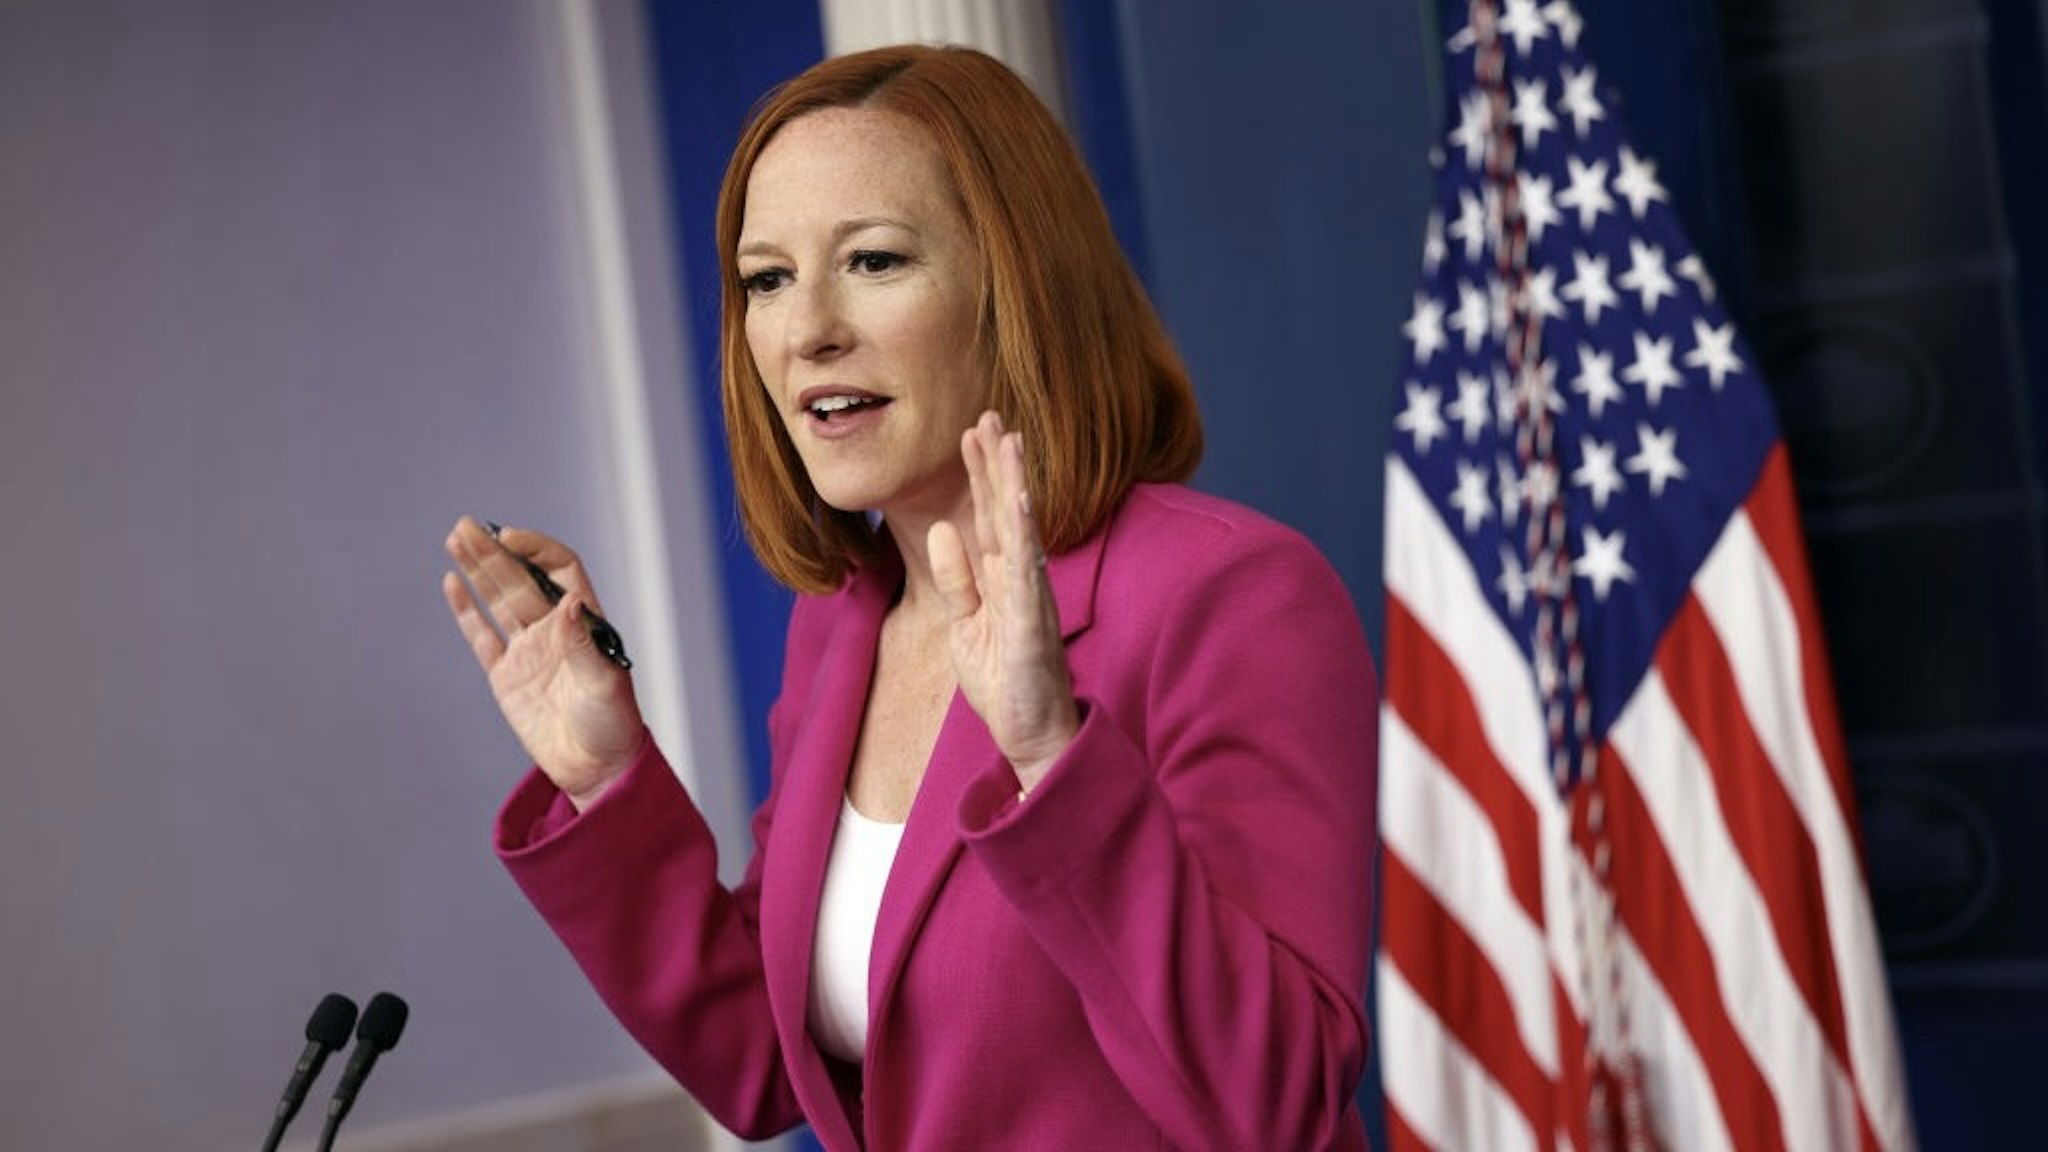 Press Secretary Jen Psaki Holds Daily Briefing At The White House WASHINGTON, DC - JUNE 22: White House Press Secretary Jen Psaki holds a press briefing at the White House on June 22, 2021 in Washington, DC. Psaki spoke on the voting reform bill and emergency preparedness for the upcoming hurricane season. (Photo by Kevin Dietsch/Getty Images) Kevin Dietsch / Staff via Getty Images